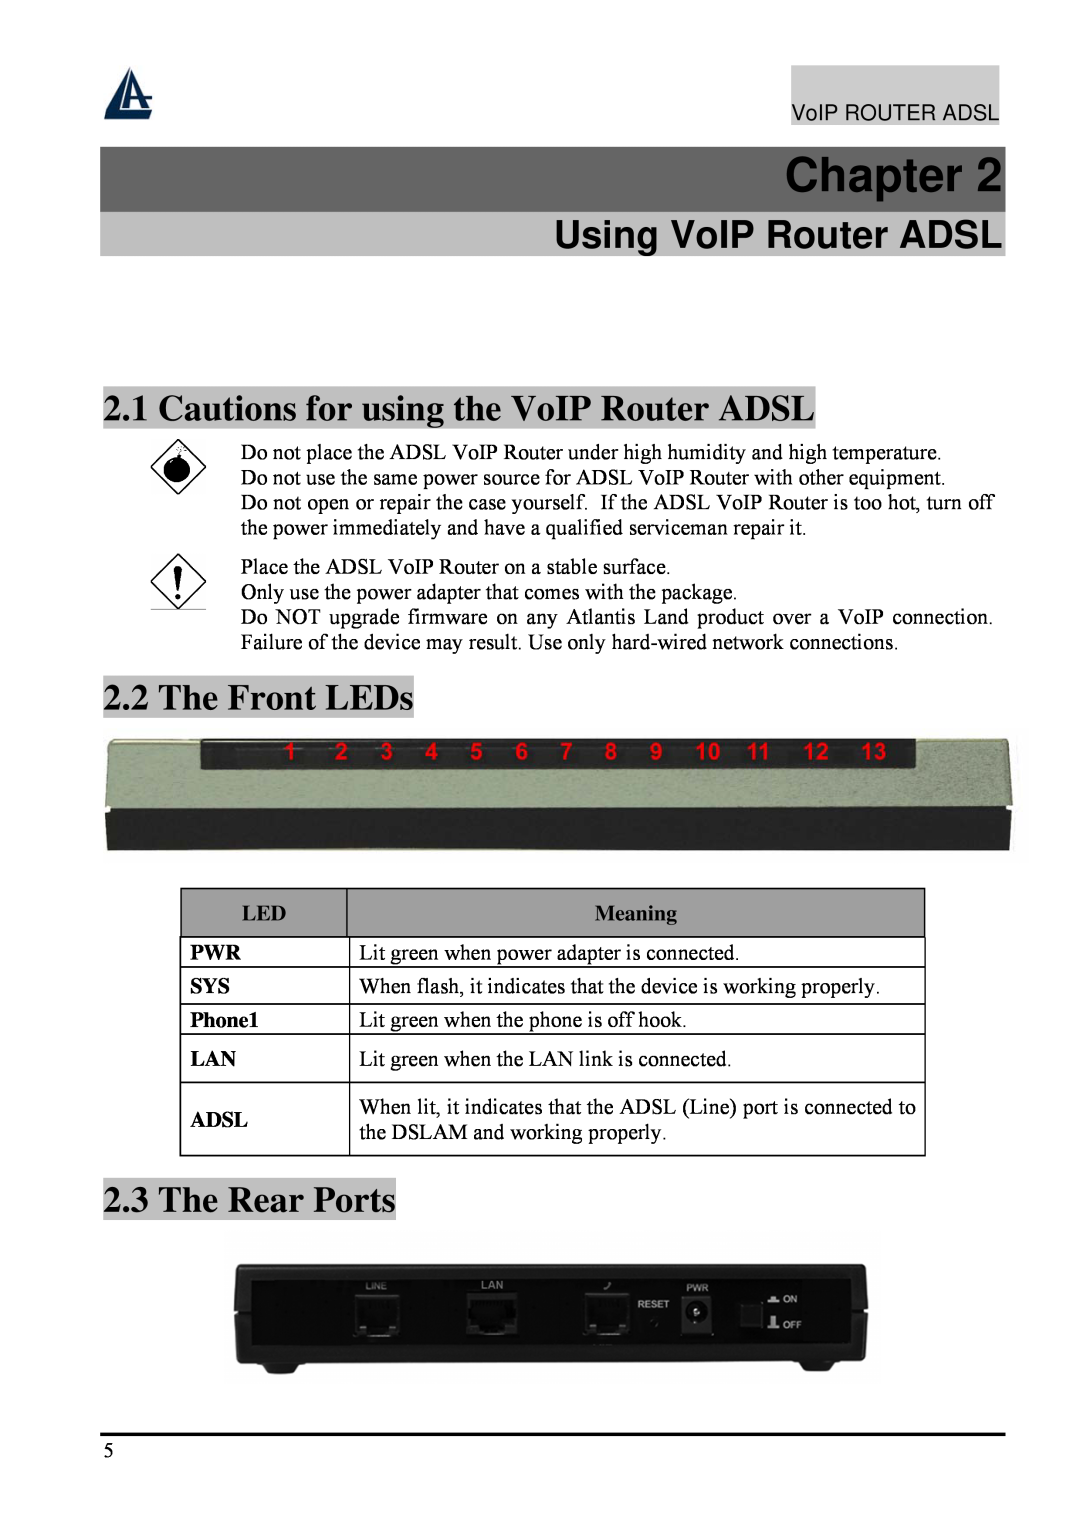 Atlantis Land A02-RAV211 Cautions for using the VoIP Router ADSL, The Front LEDs, The Rear Ports, Meaning, Phone1, Adsl 